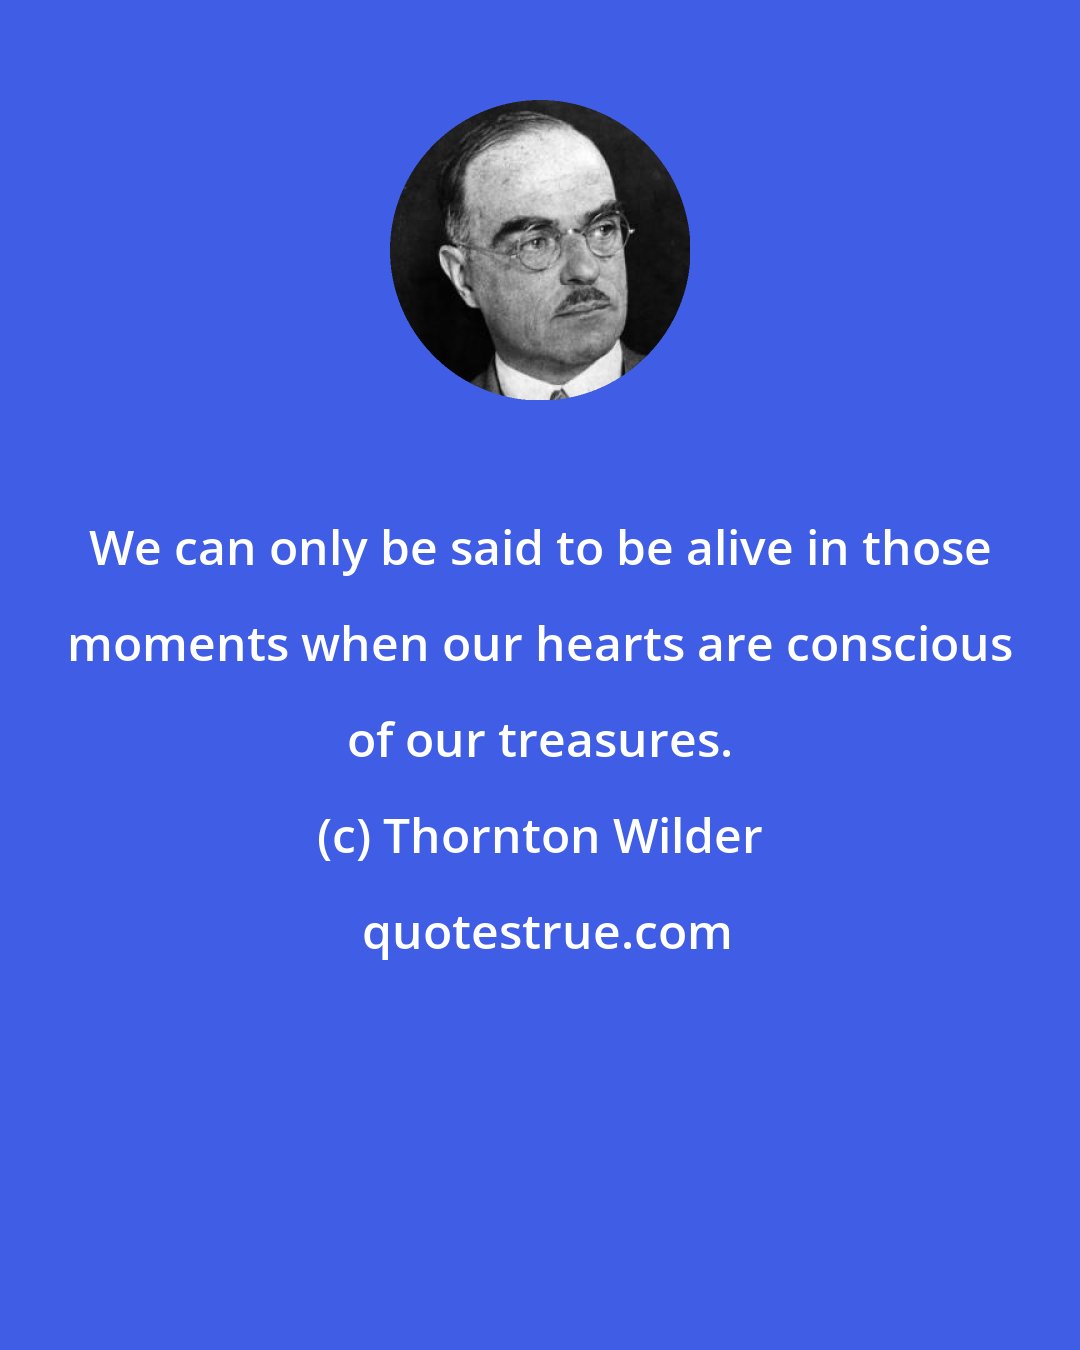 Thornton Wilder: We can only be said to be alive in those moments when our hearts are conscious of our treasures.